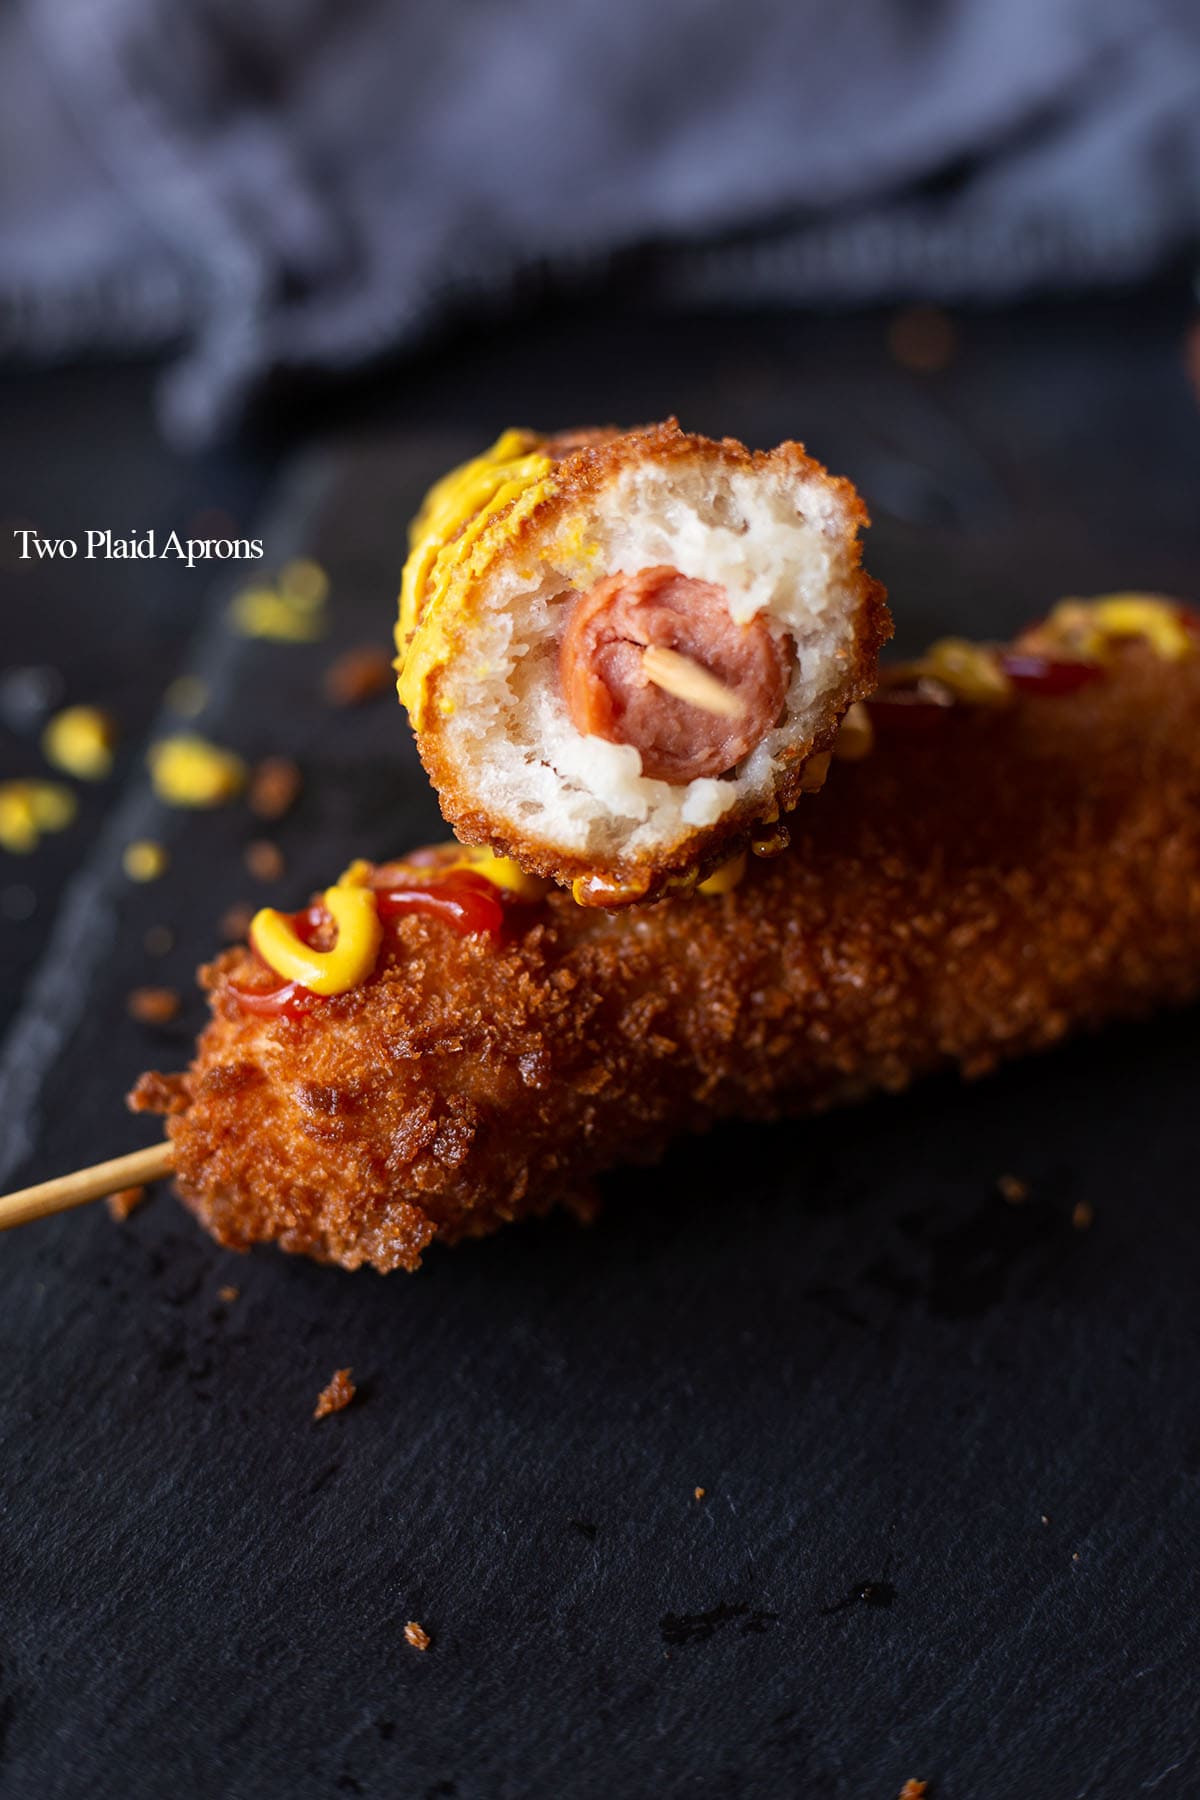 Half of a Korean corn dog leaning on another corn dog.